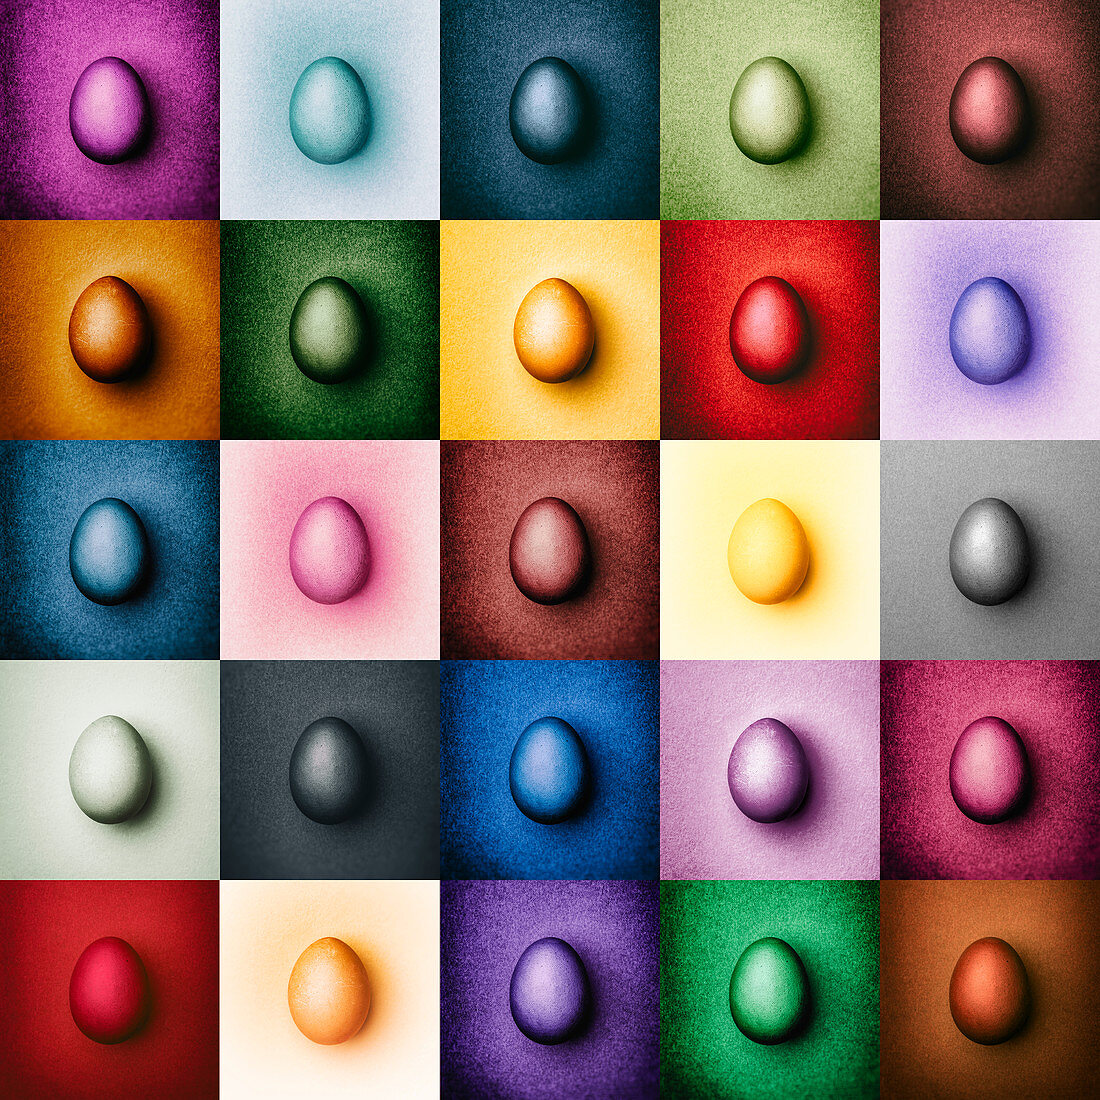 Graphic collage with Easter eggs in different colors on a colorful background